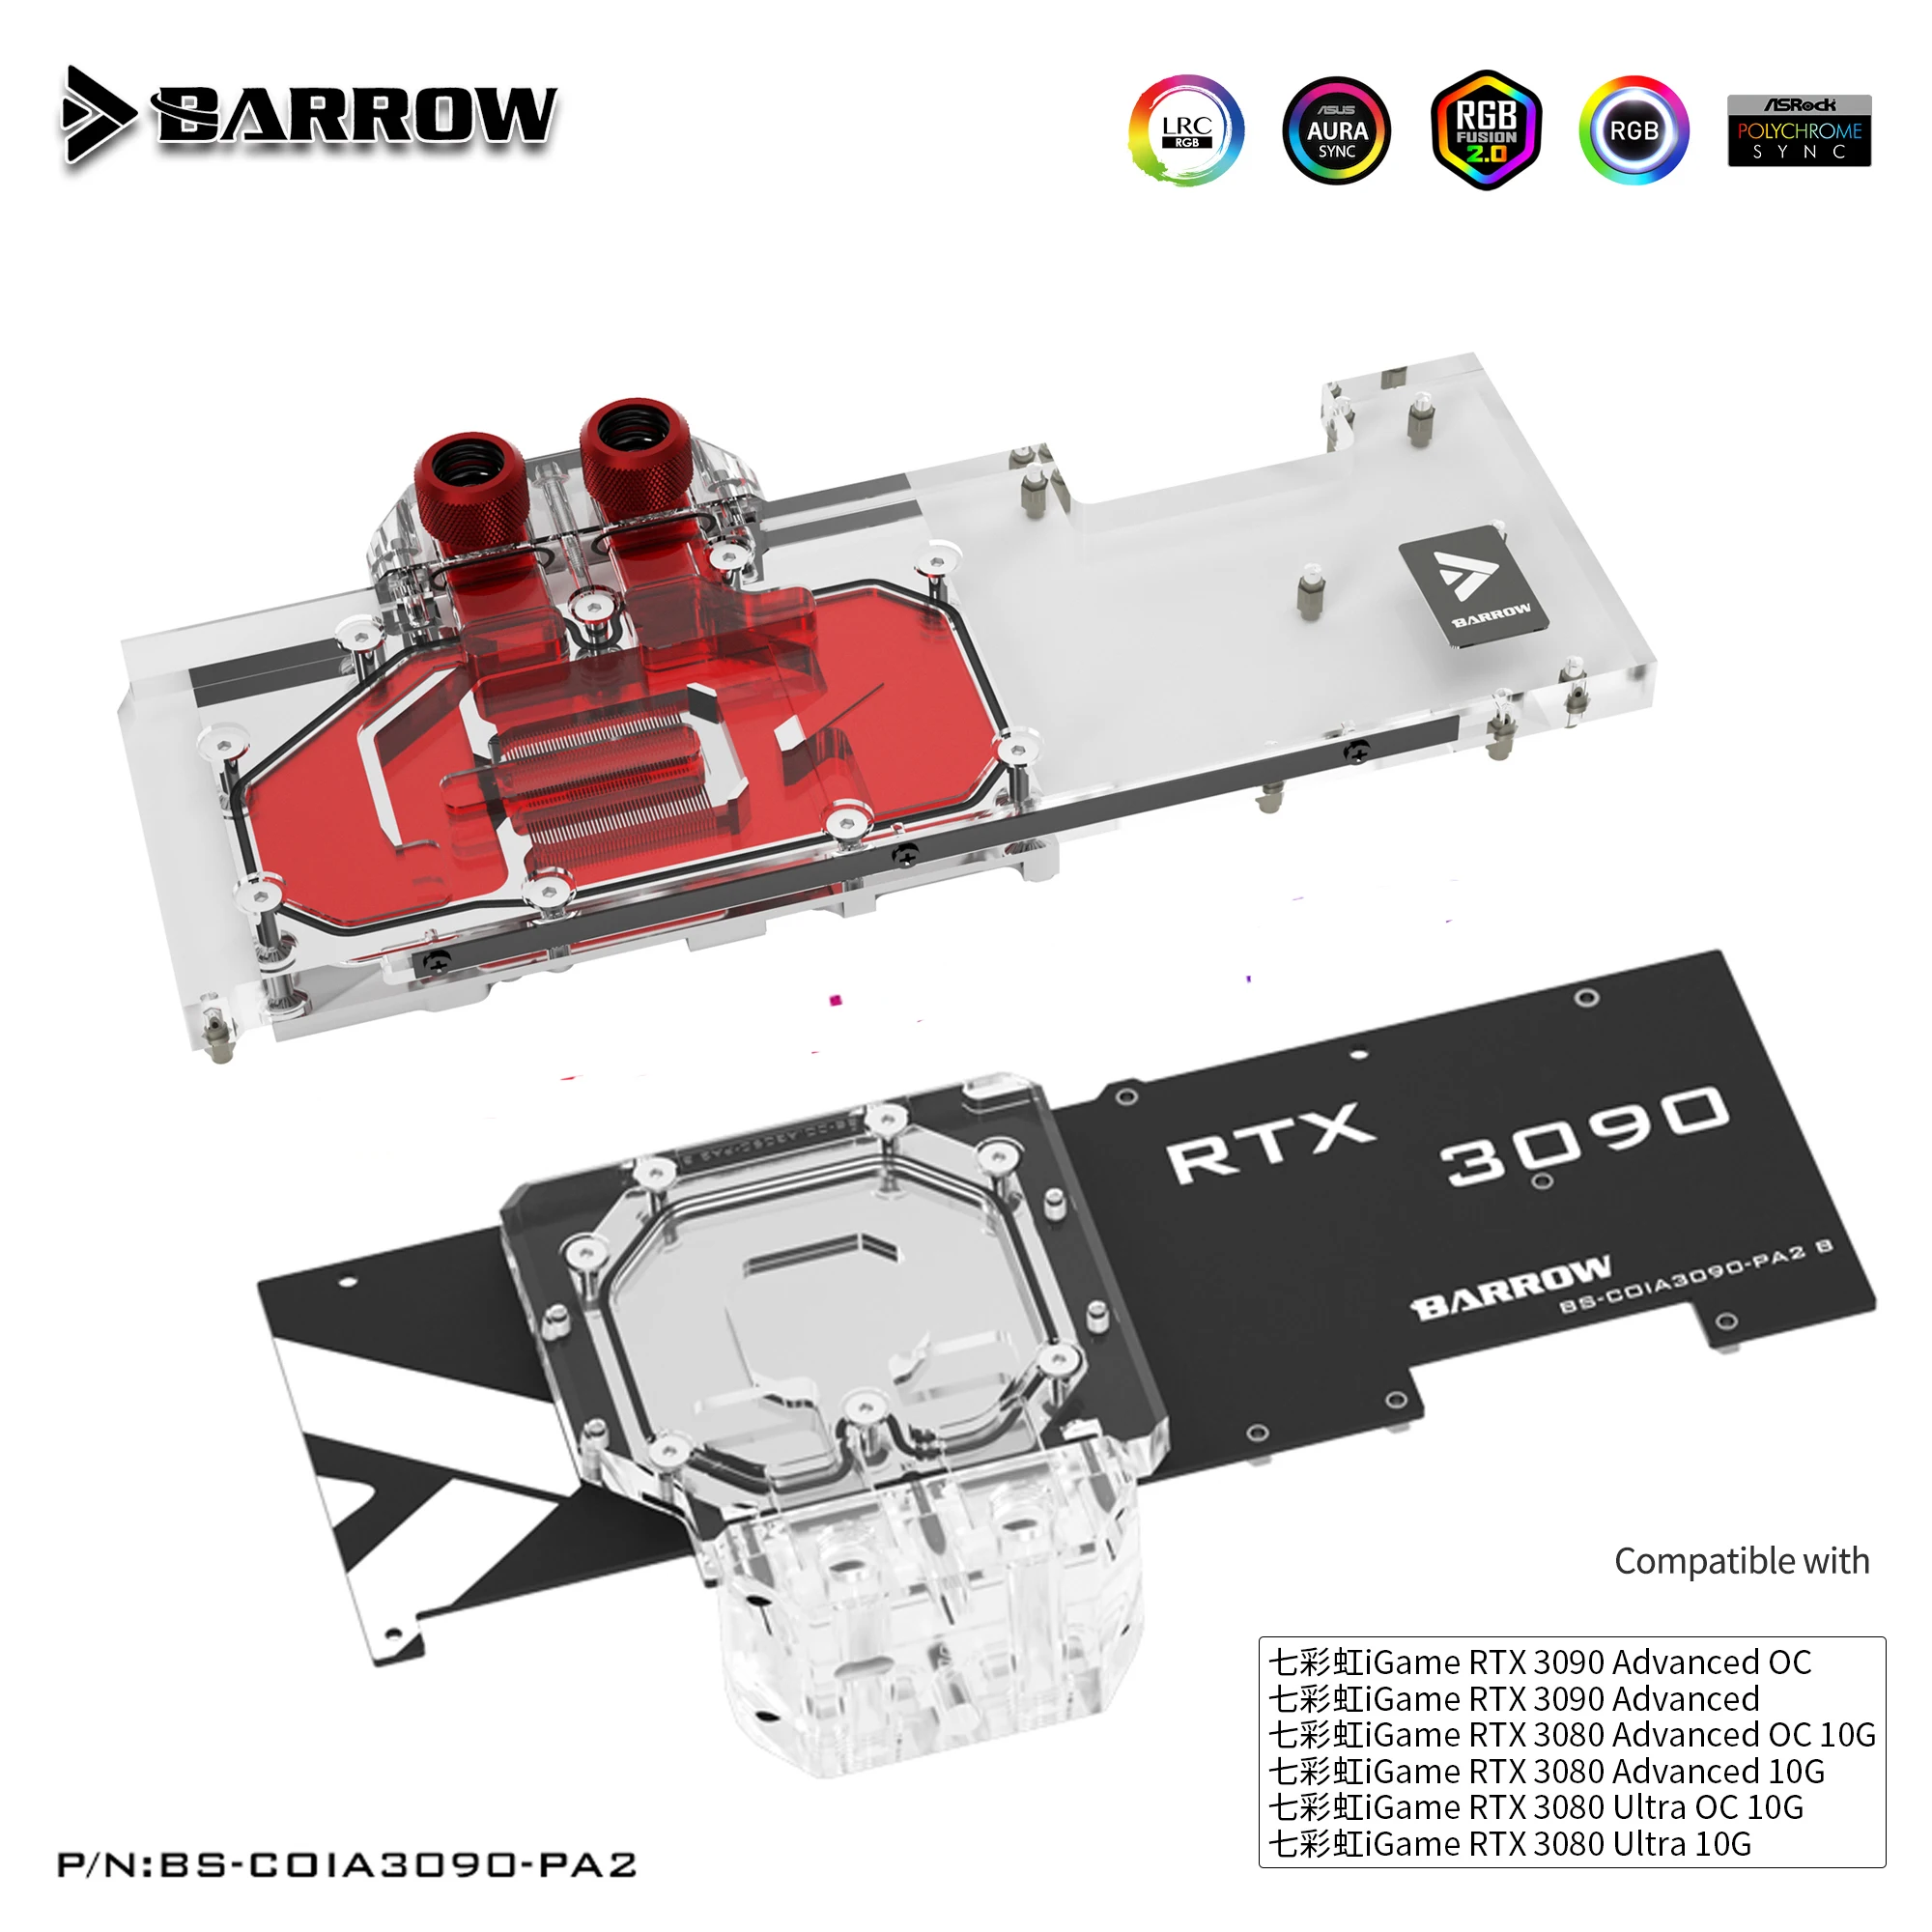 Barrow GPU Water Block Backplane for Colorful RTX 3090 3080 Advanced OC,Full Cover Water cooled Backplate,BS-COIA3090-PA2 B